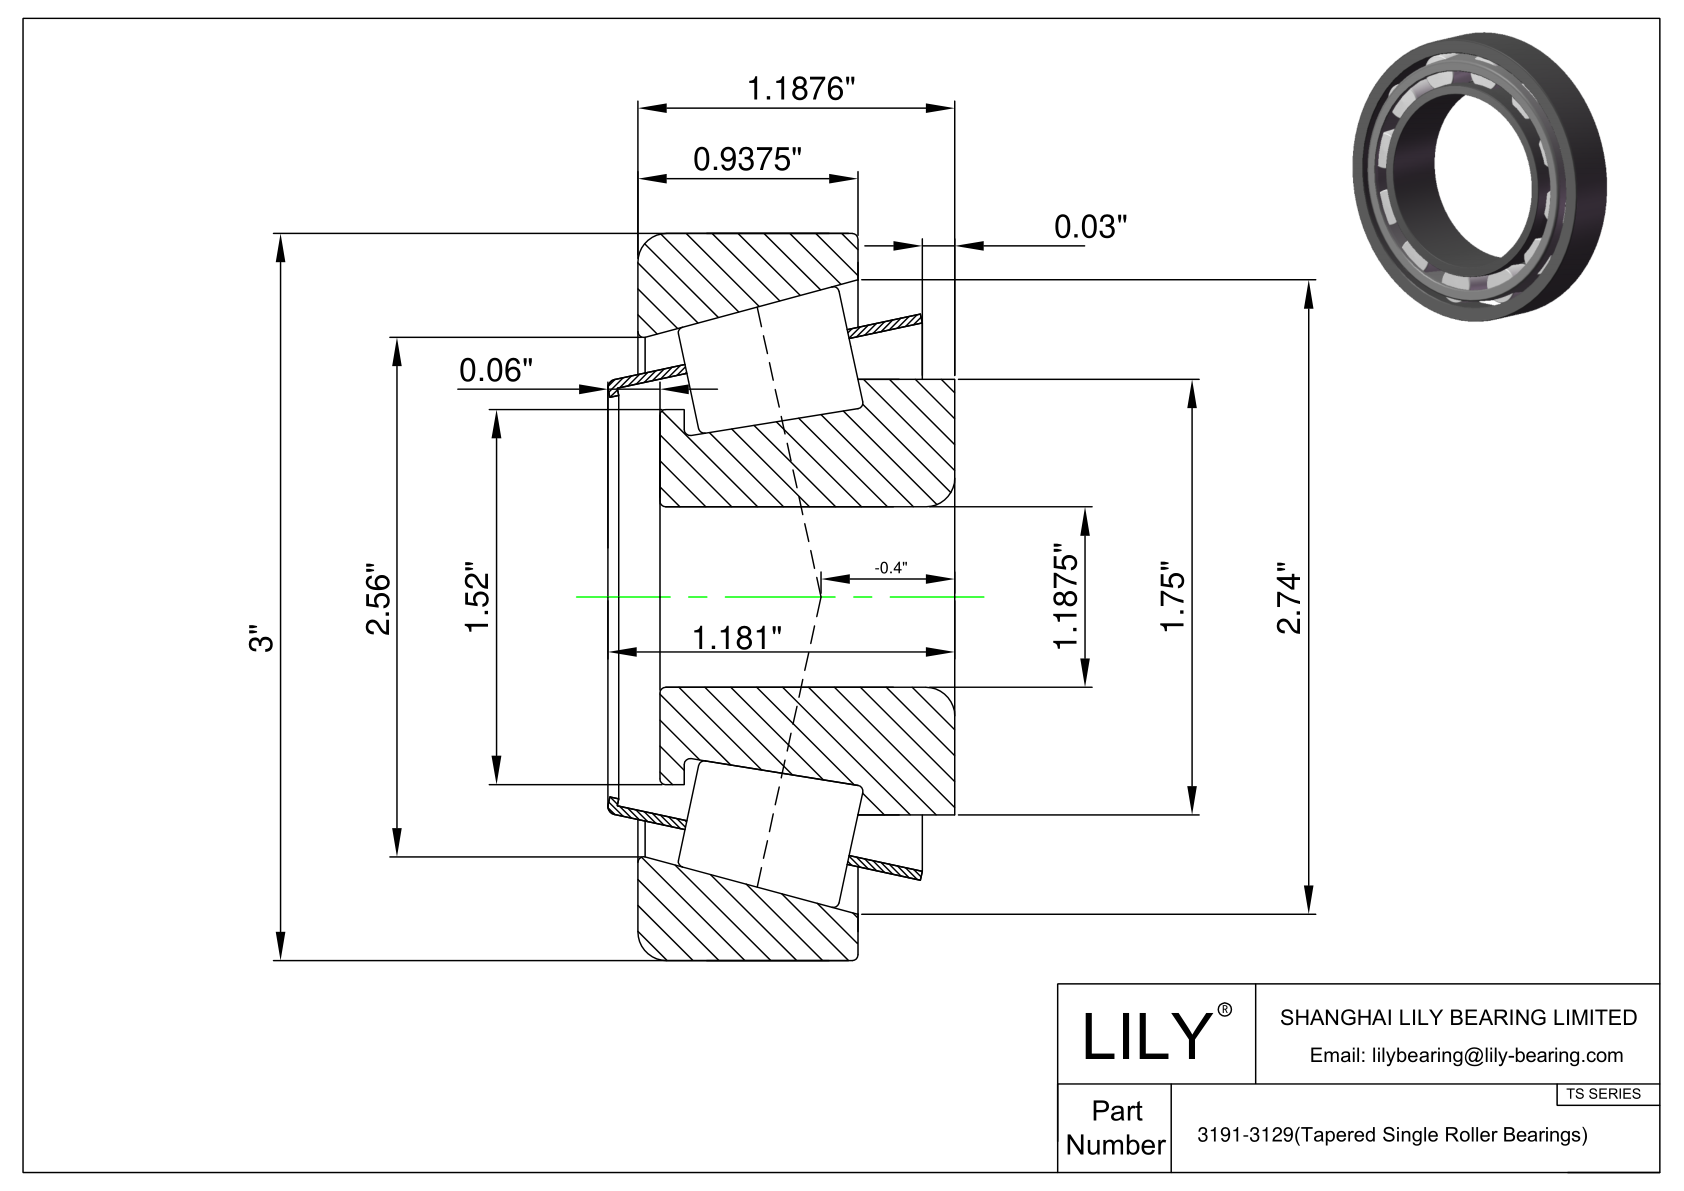 3191-3129 TS (Tapered Single Roller Bearings) (Imperial) cad drawing